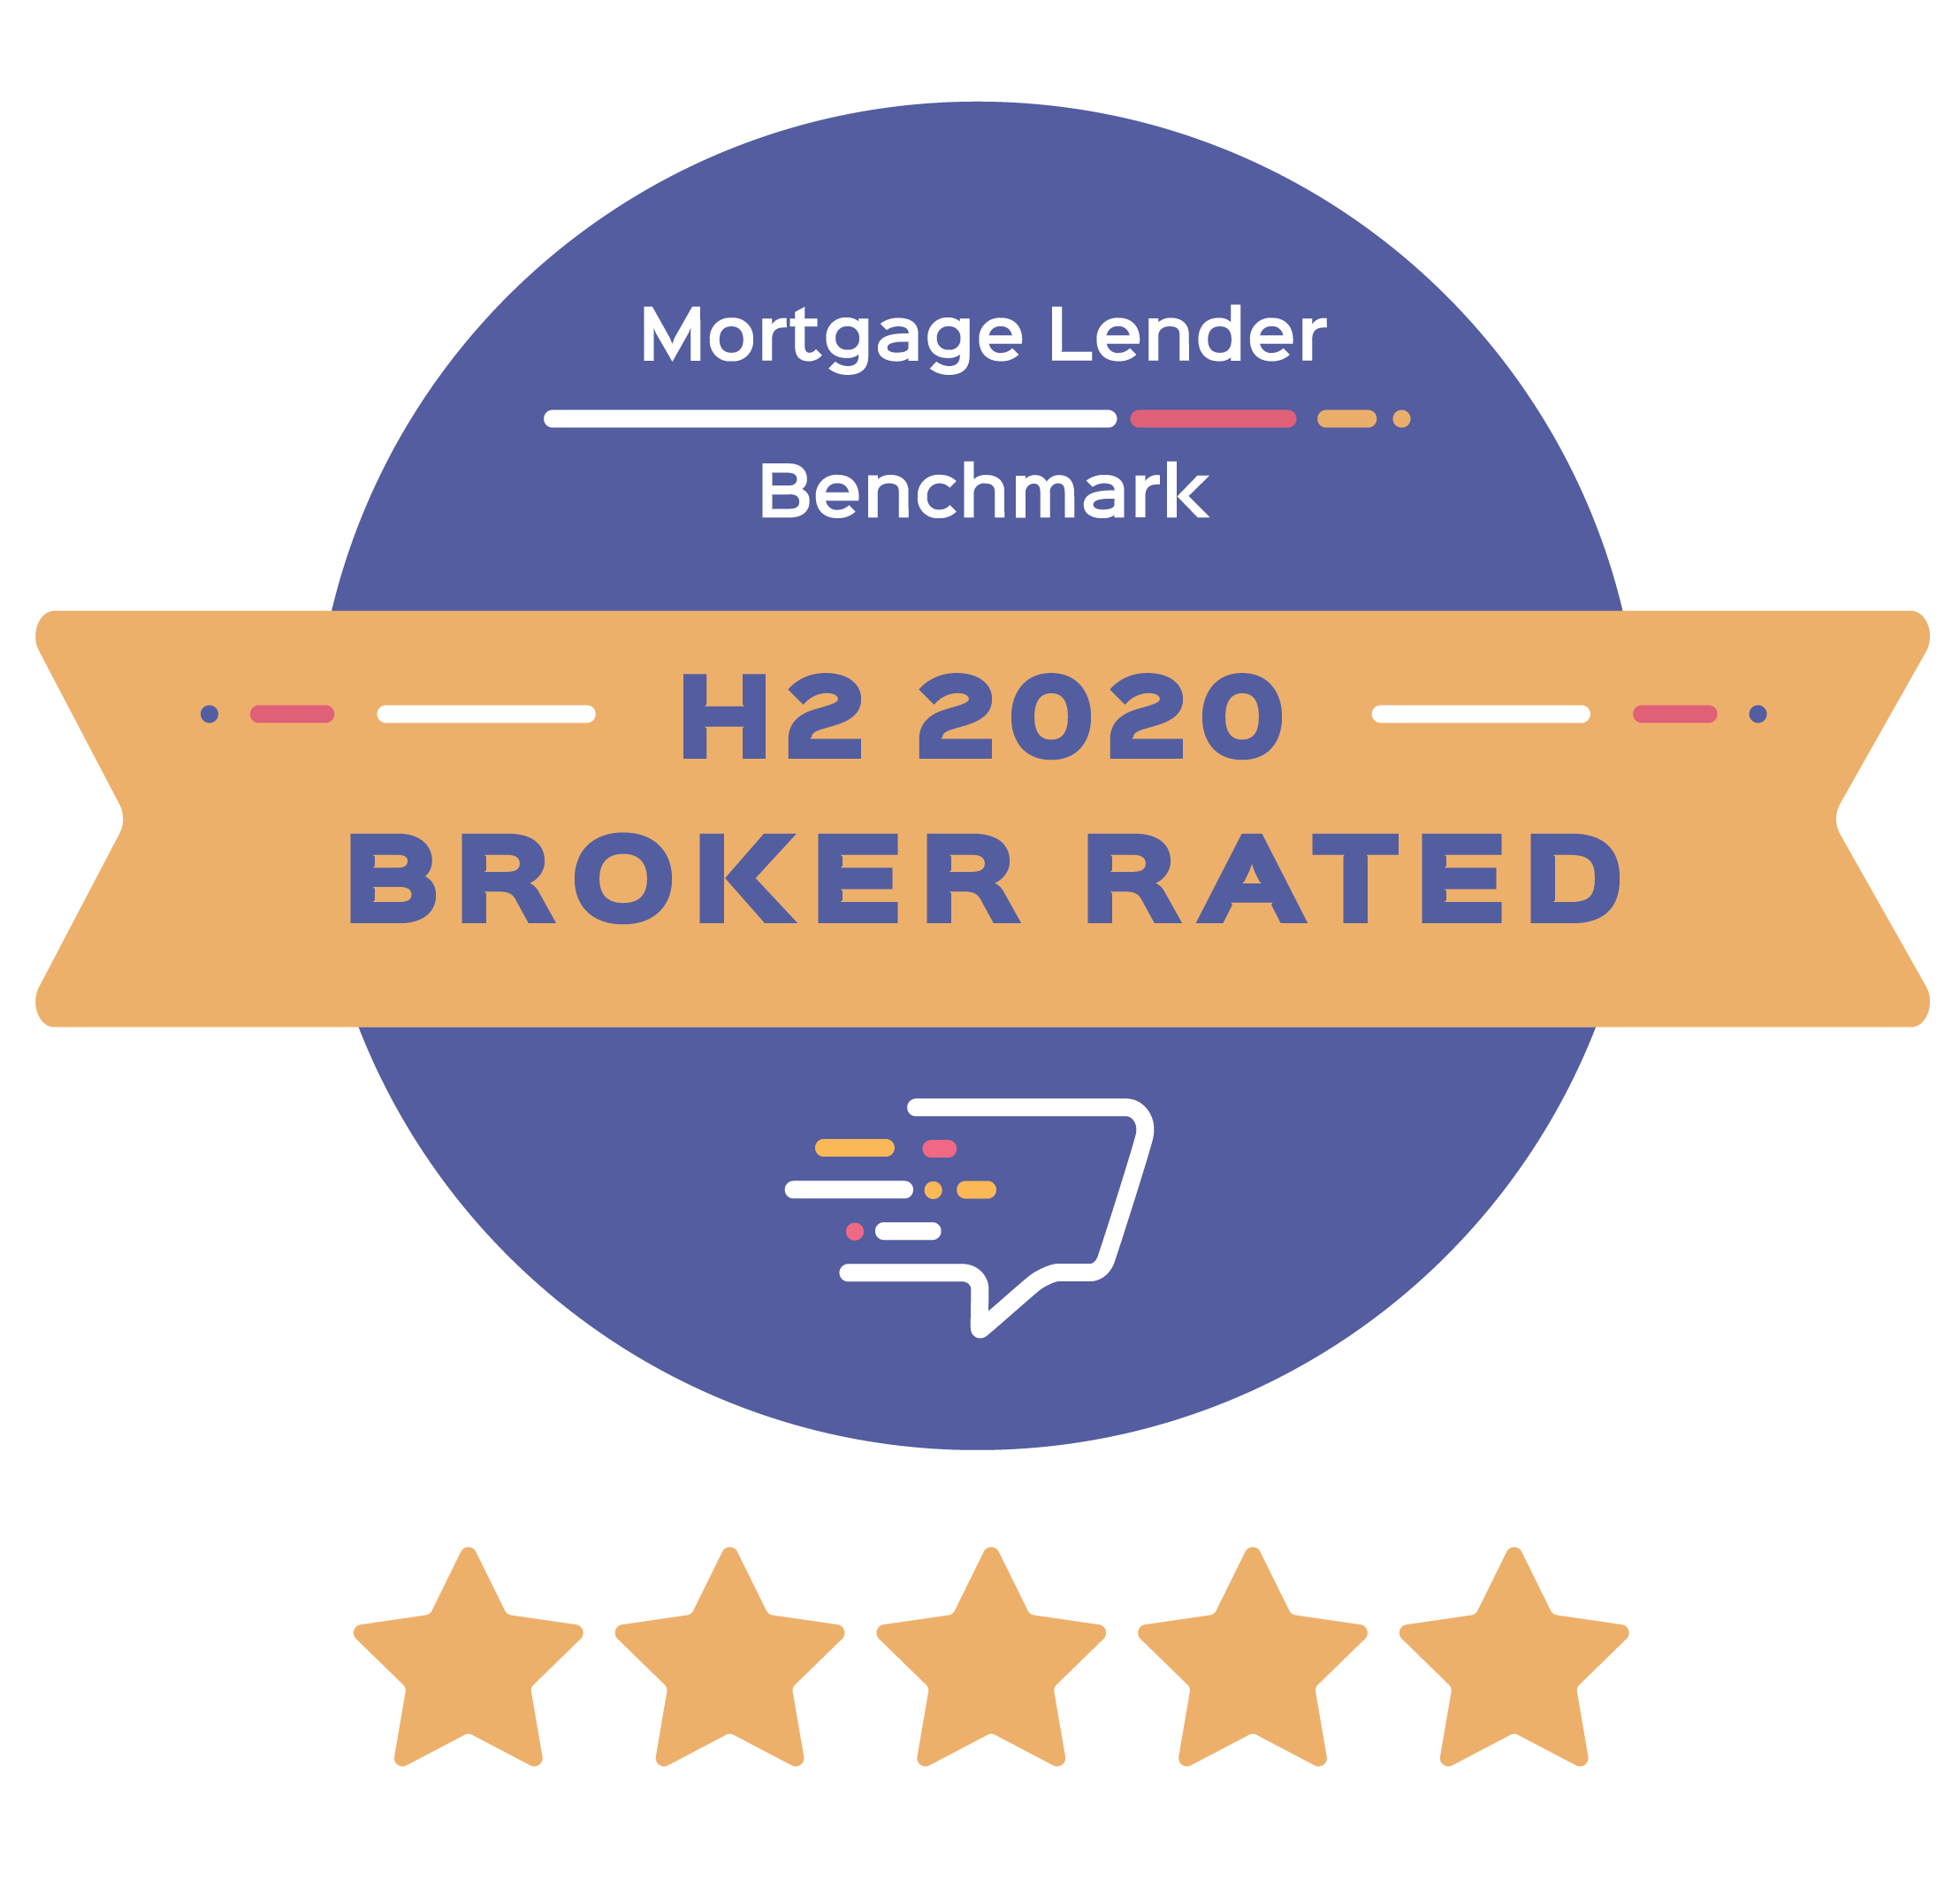 H2 2020 5 star Broker Rated